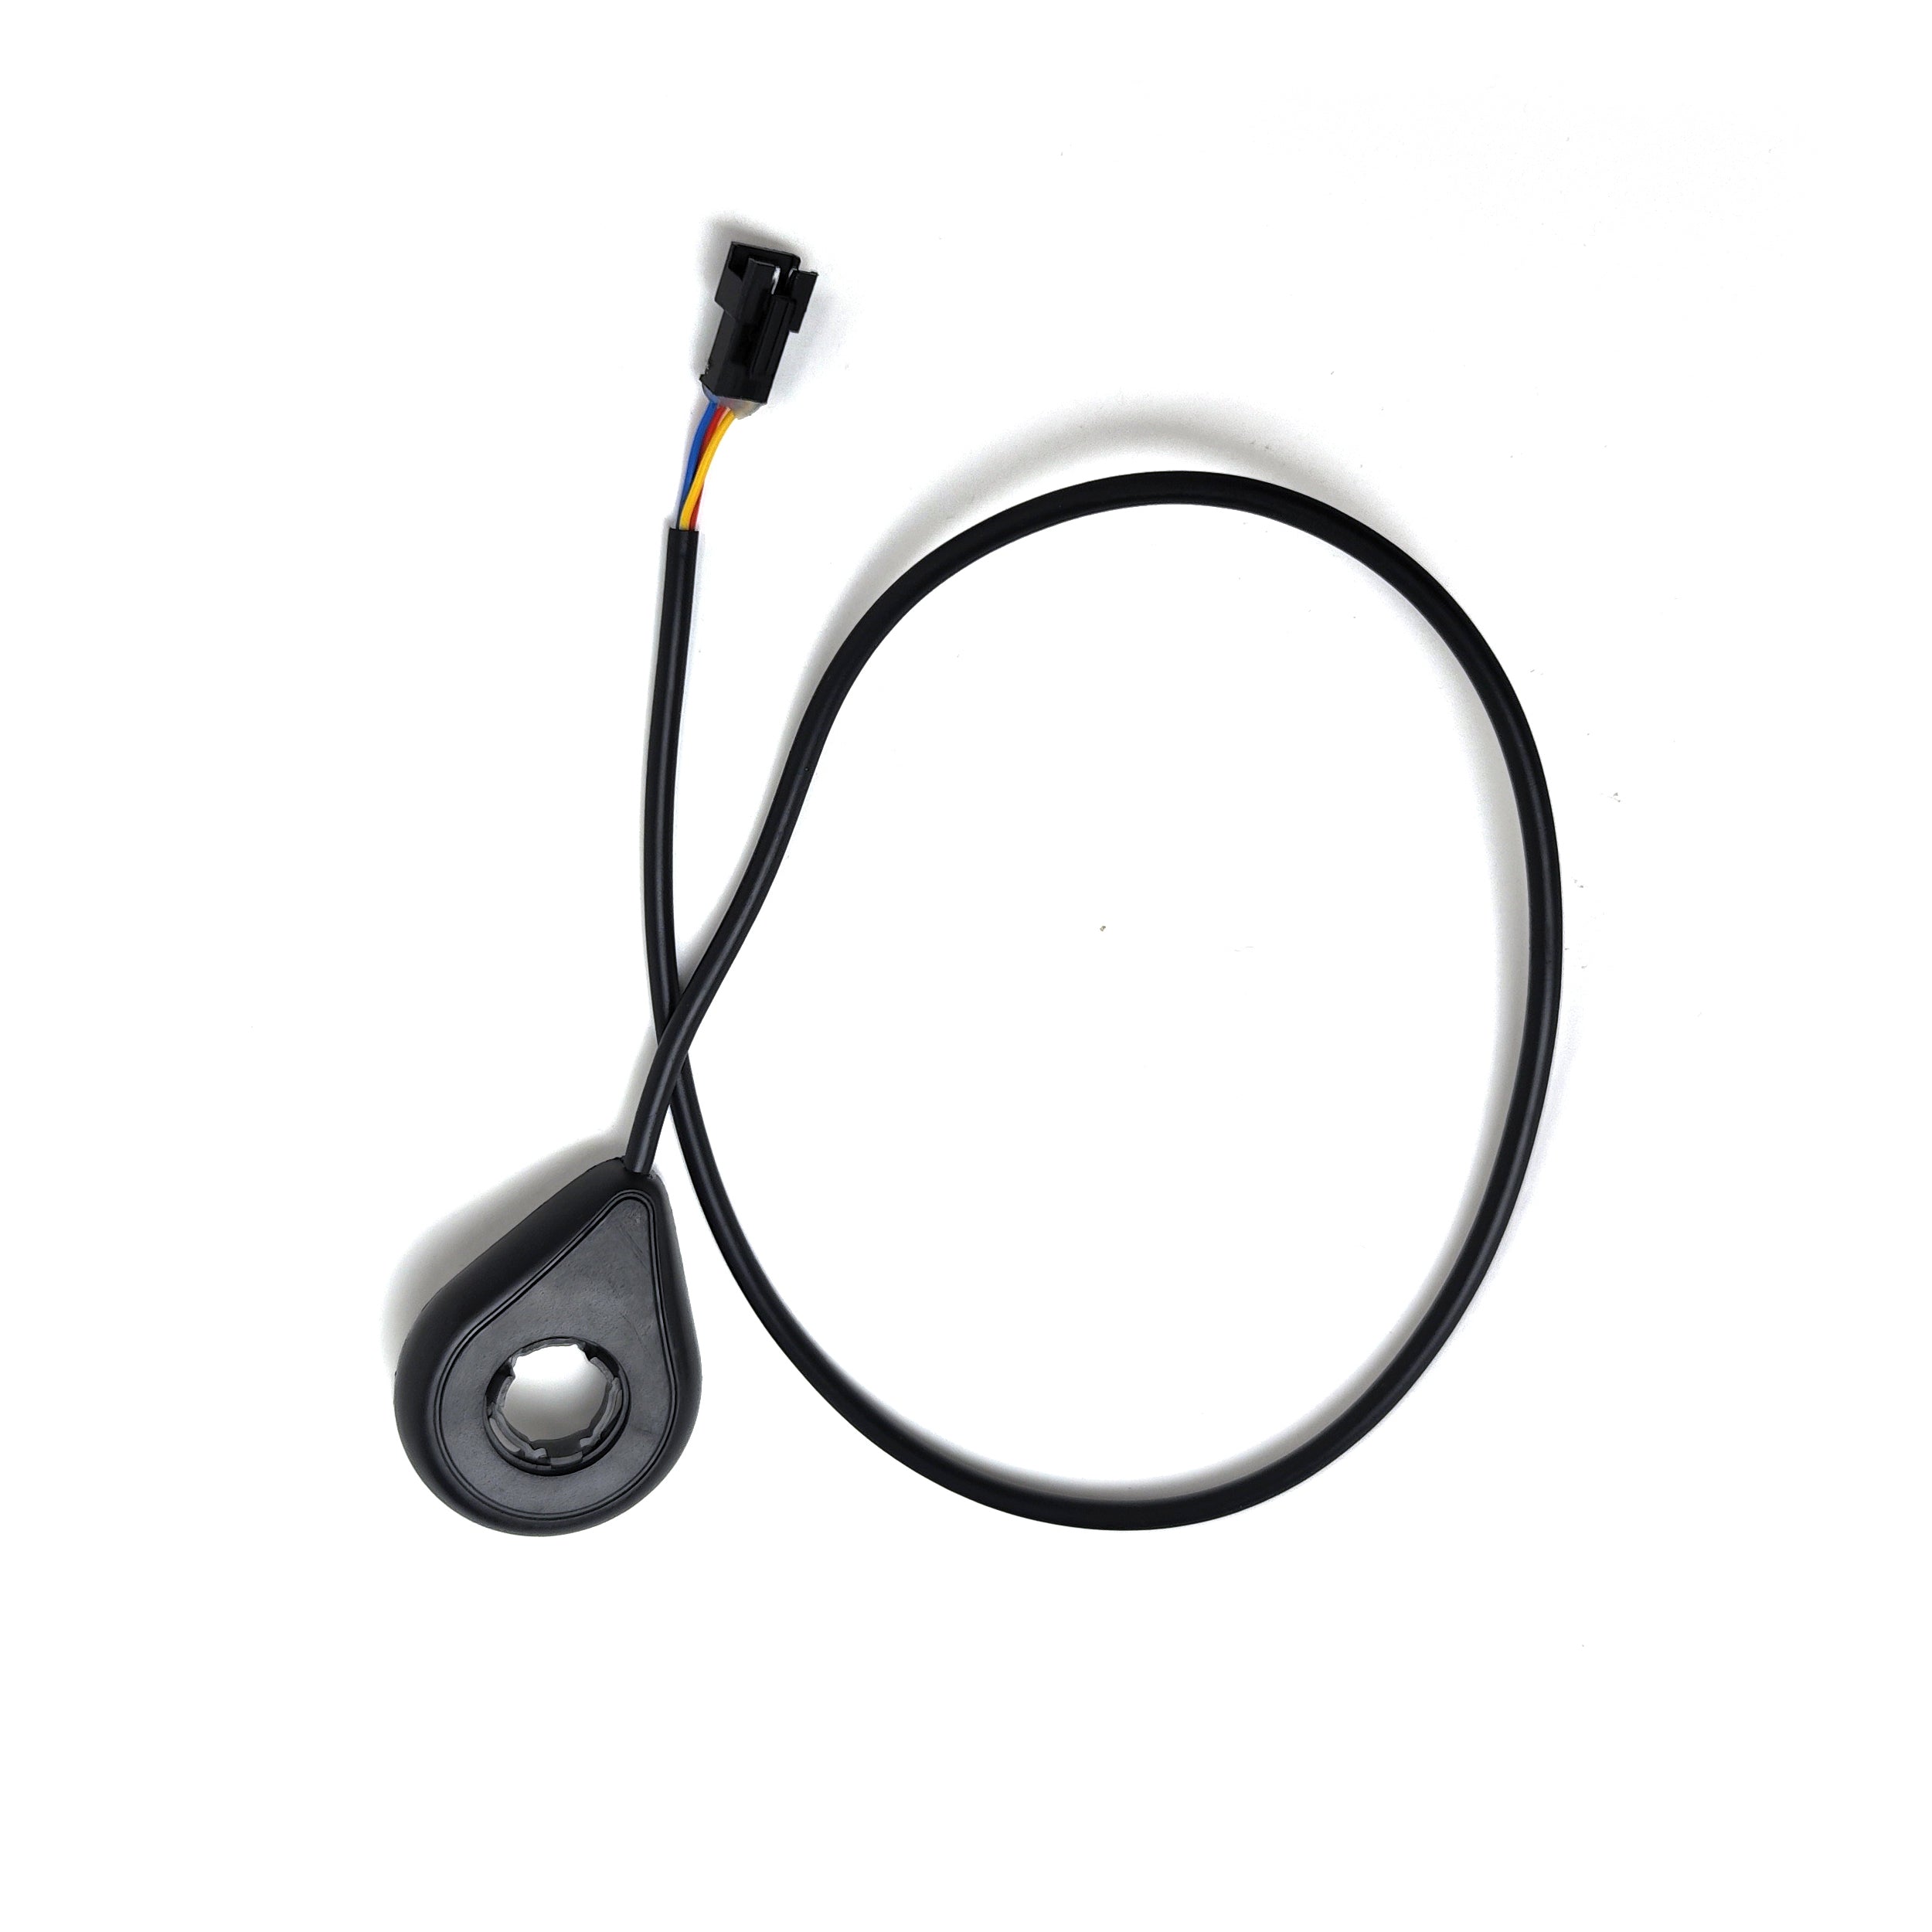 BOOSTER CABLE FOR COSWHEEL EBIKE